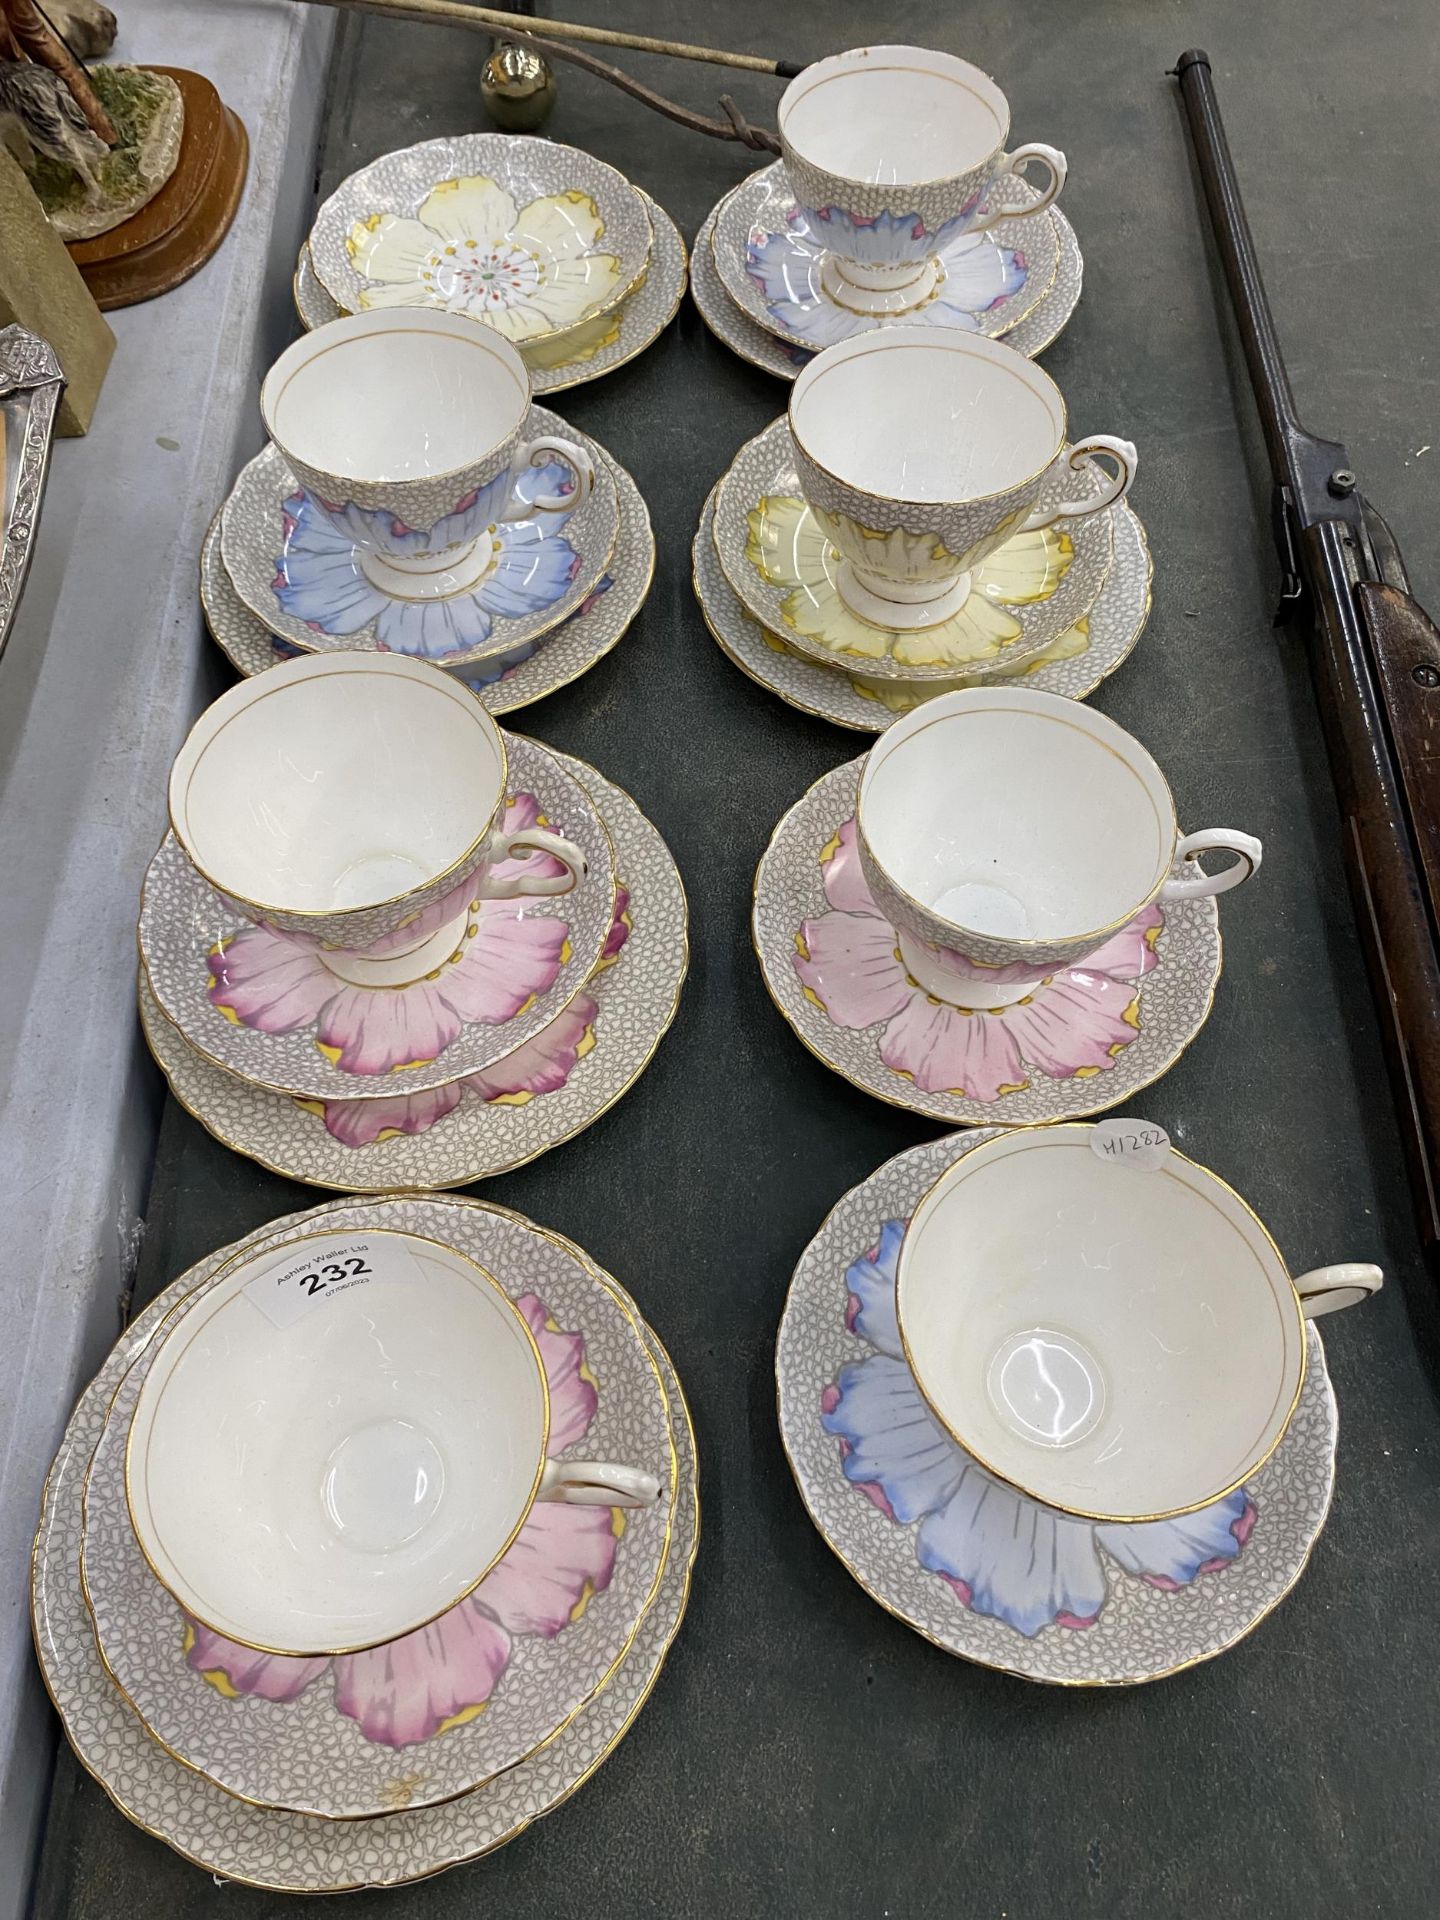 A QUANTITY OF TUSCAN FLORAL PATTERNED CUPS, SAUCERS AND SIDE PLATES